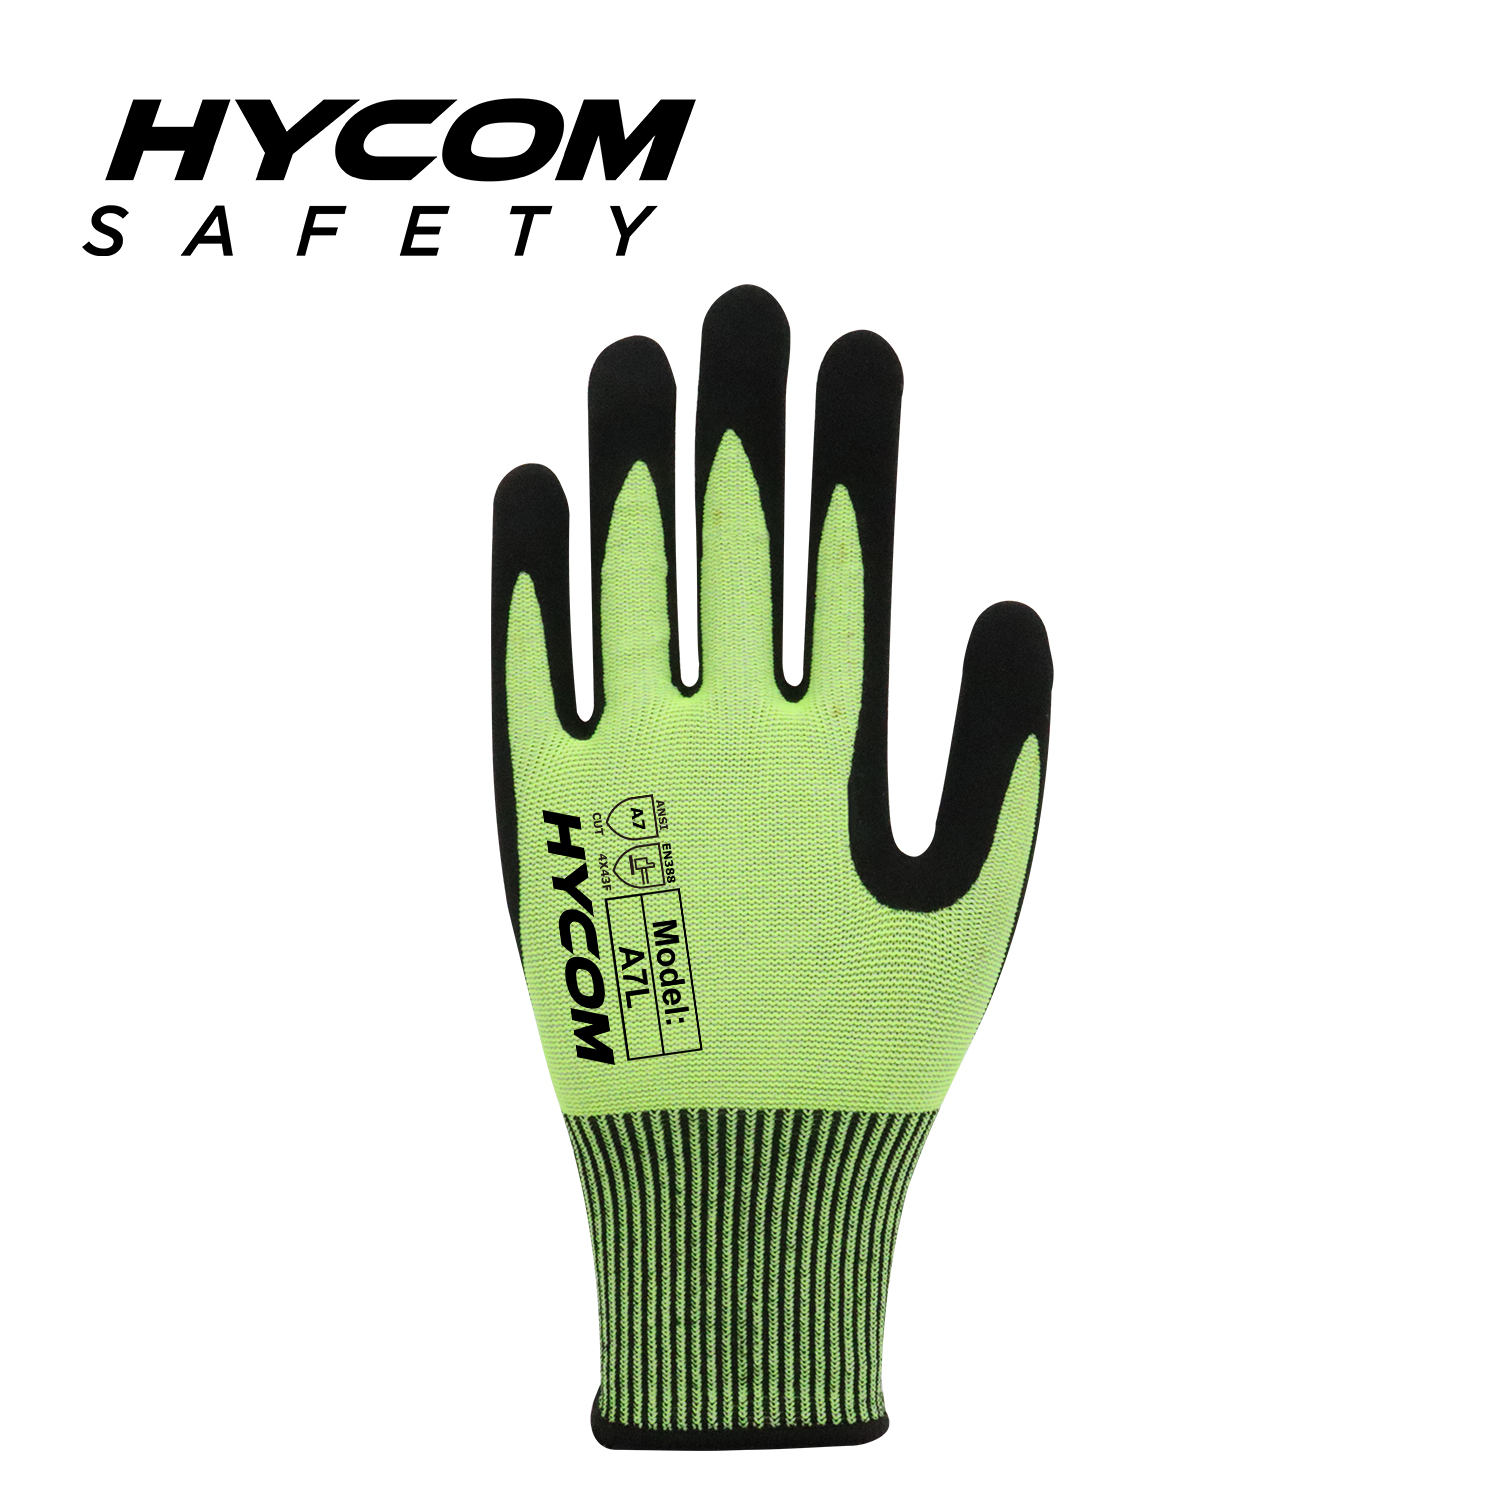 HYCOM 13G ANSI 7 Cut Resistant Glove with Palm Nitrile Coating PPE Gloves